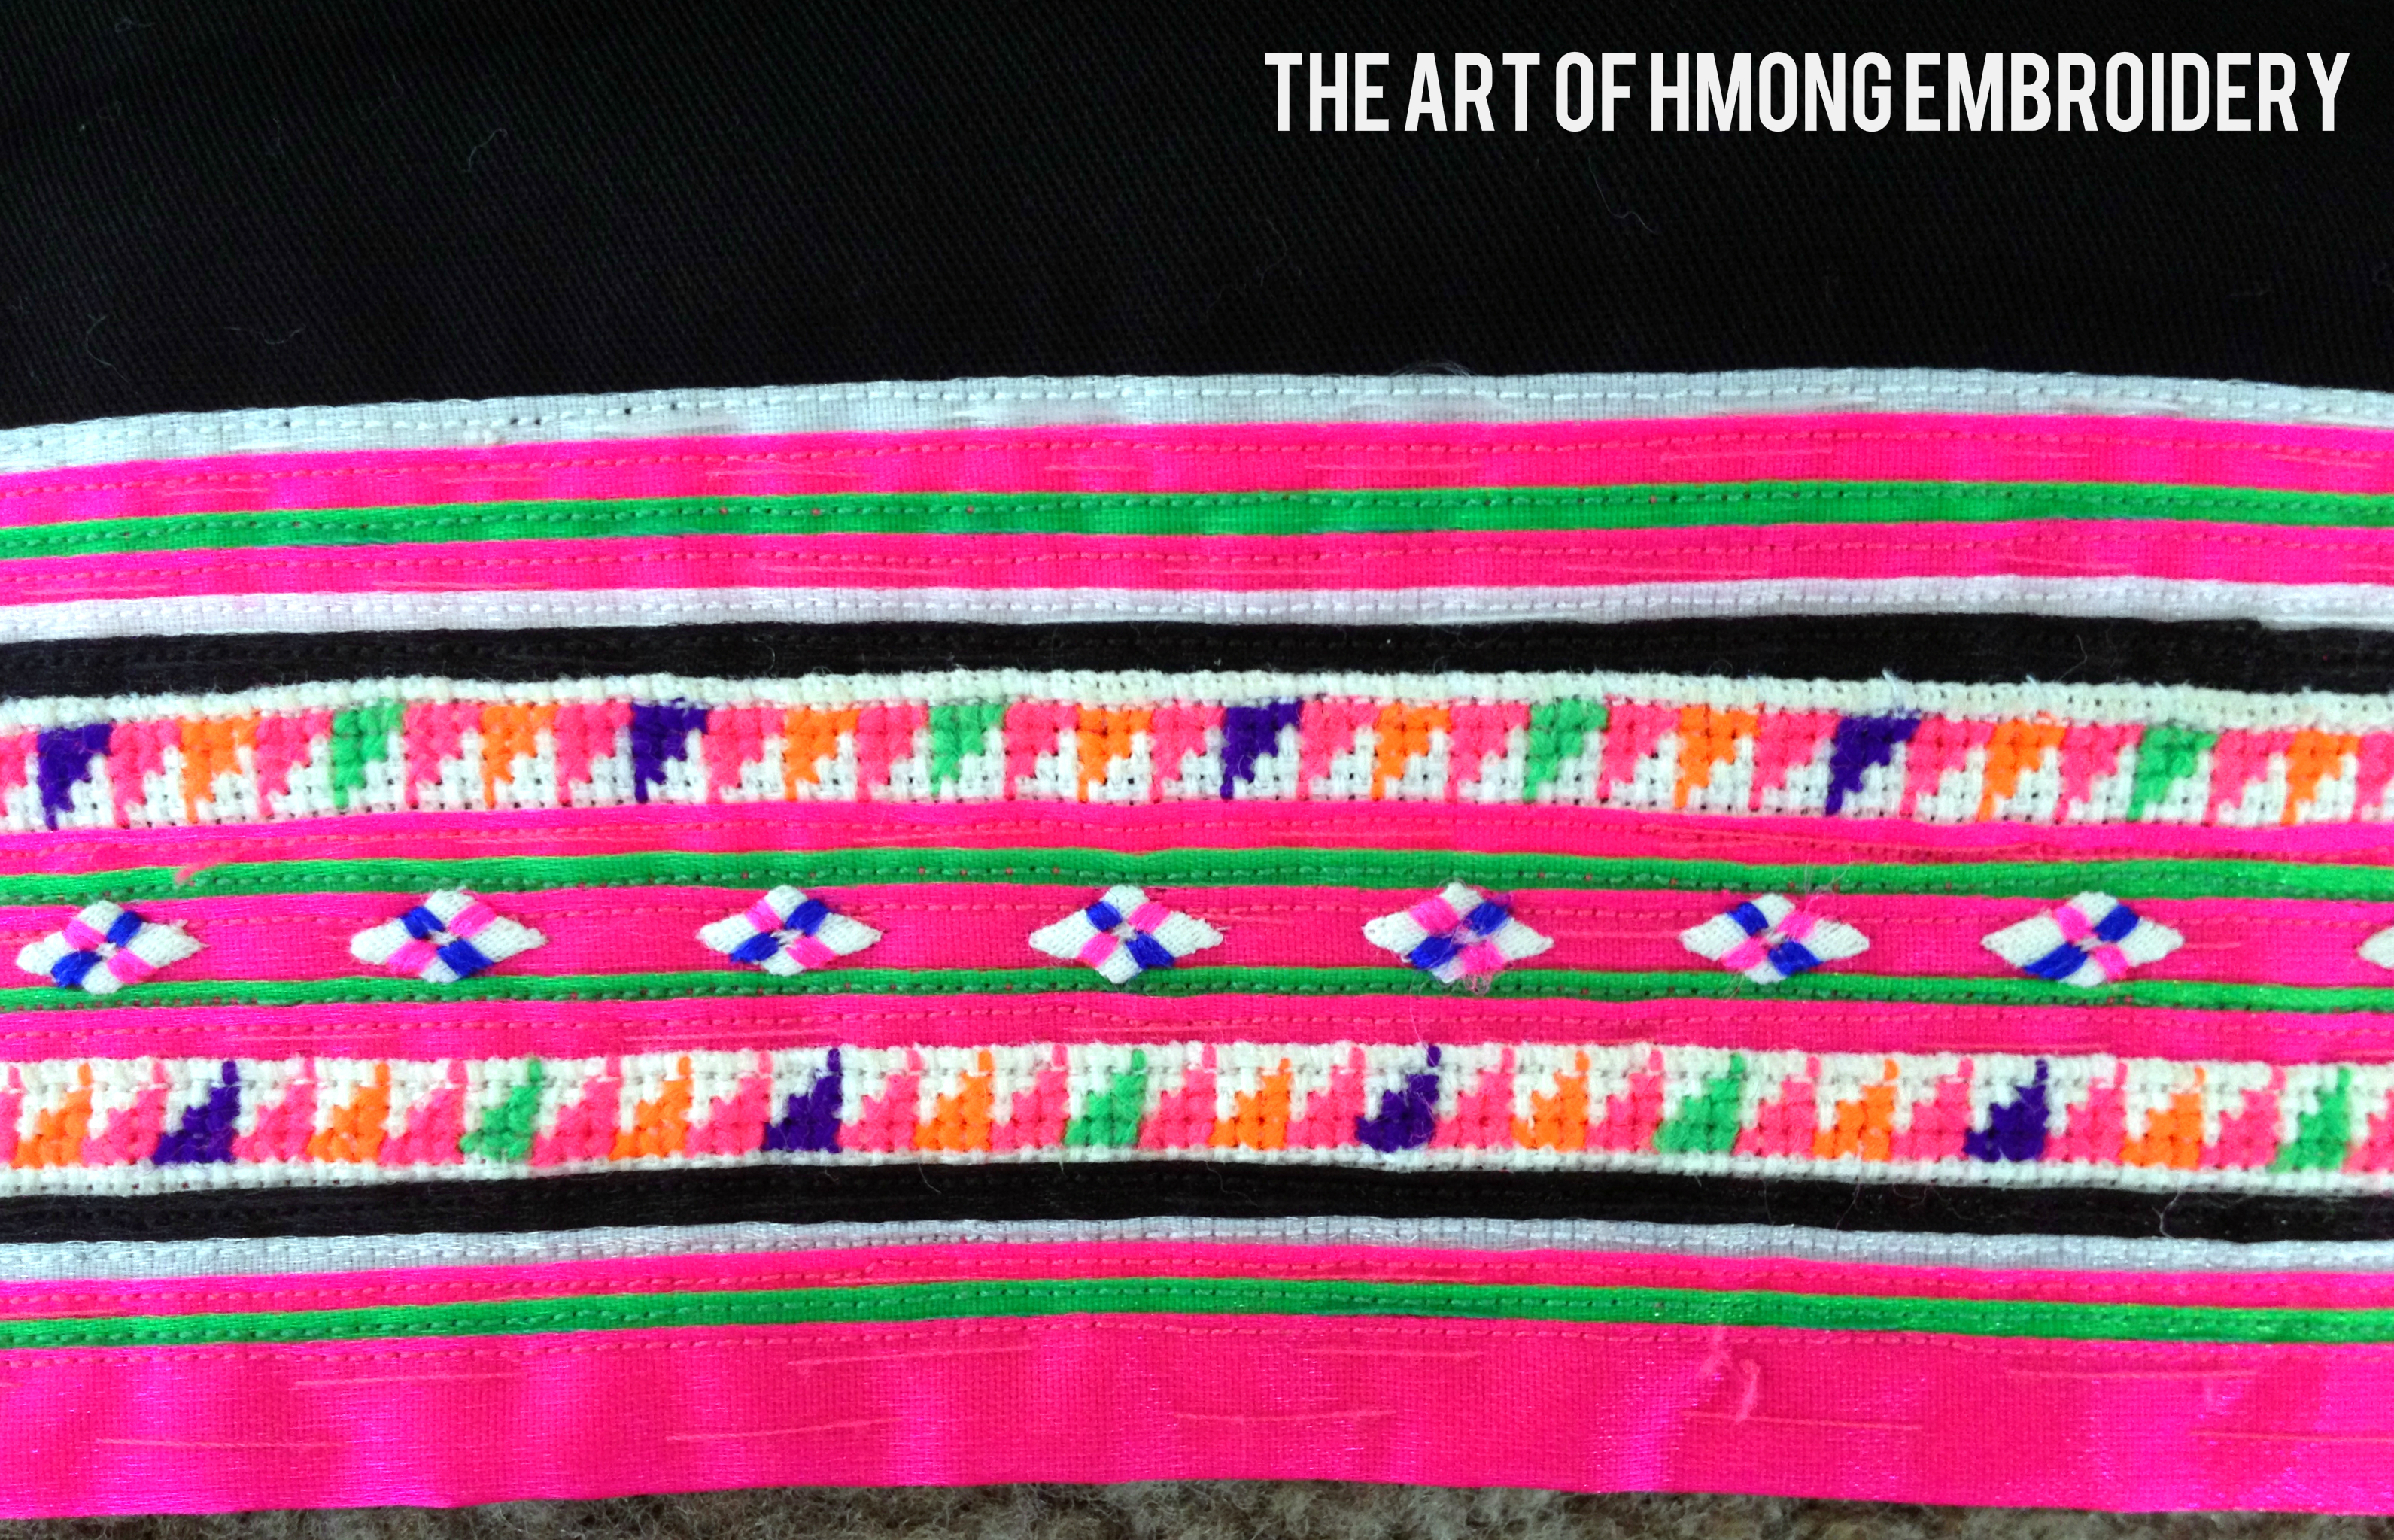 Hmong Embroidery Patterns Hmong Cross Stitch The Art Of Hmong Embroidery